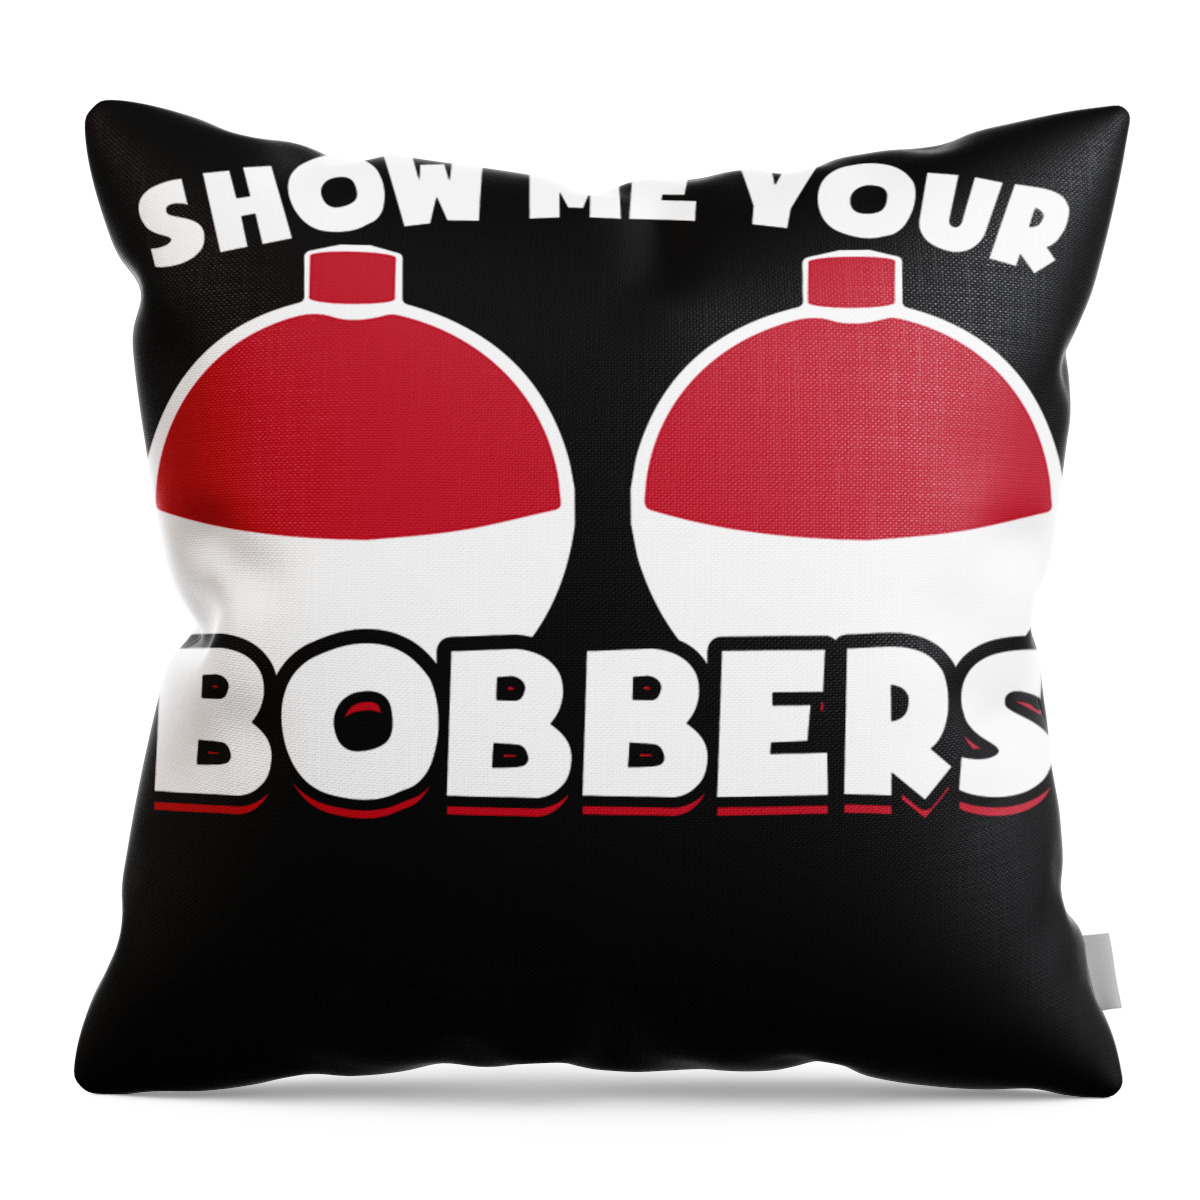 Funny Fishing Gifts Gear Show Me Your Bobbers Throw Pillow by Tom